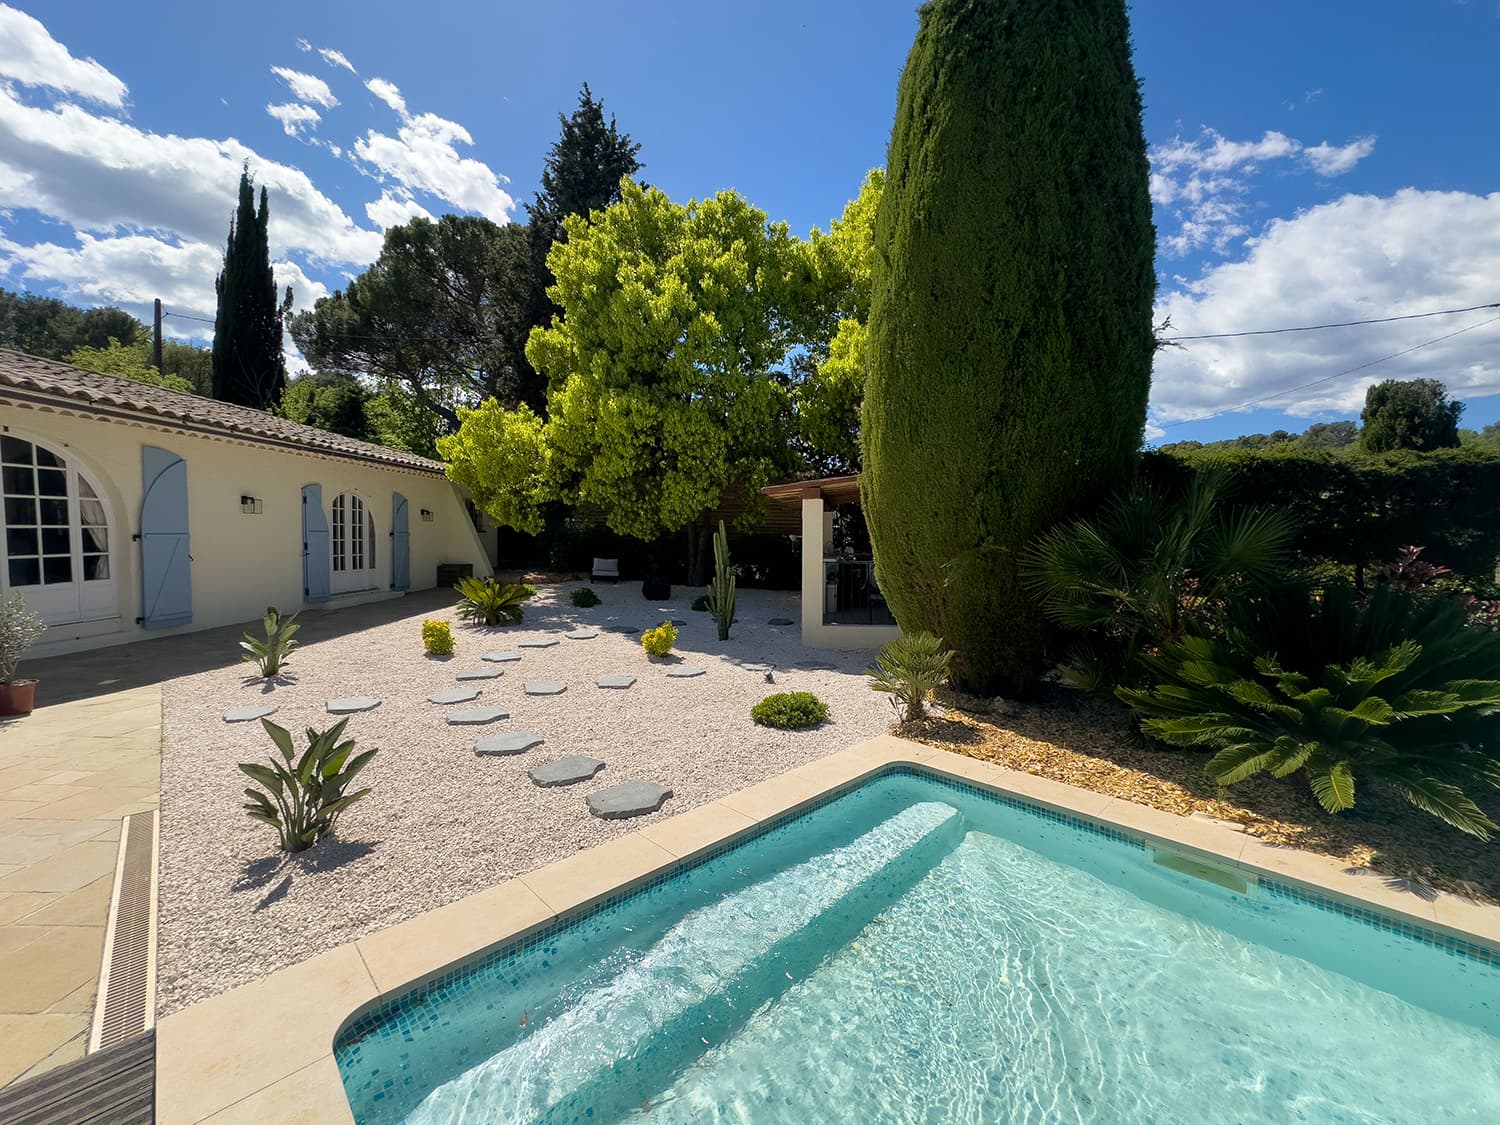 Garden in France with private pool